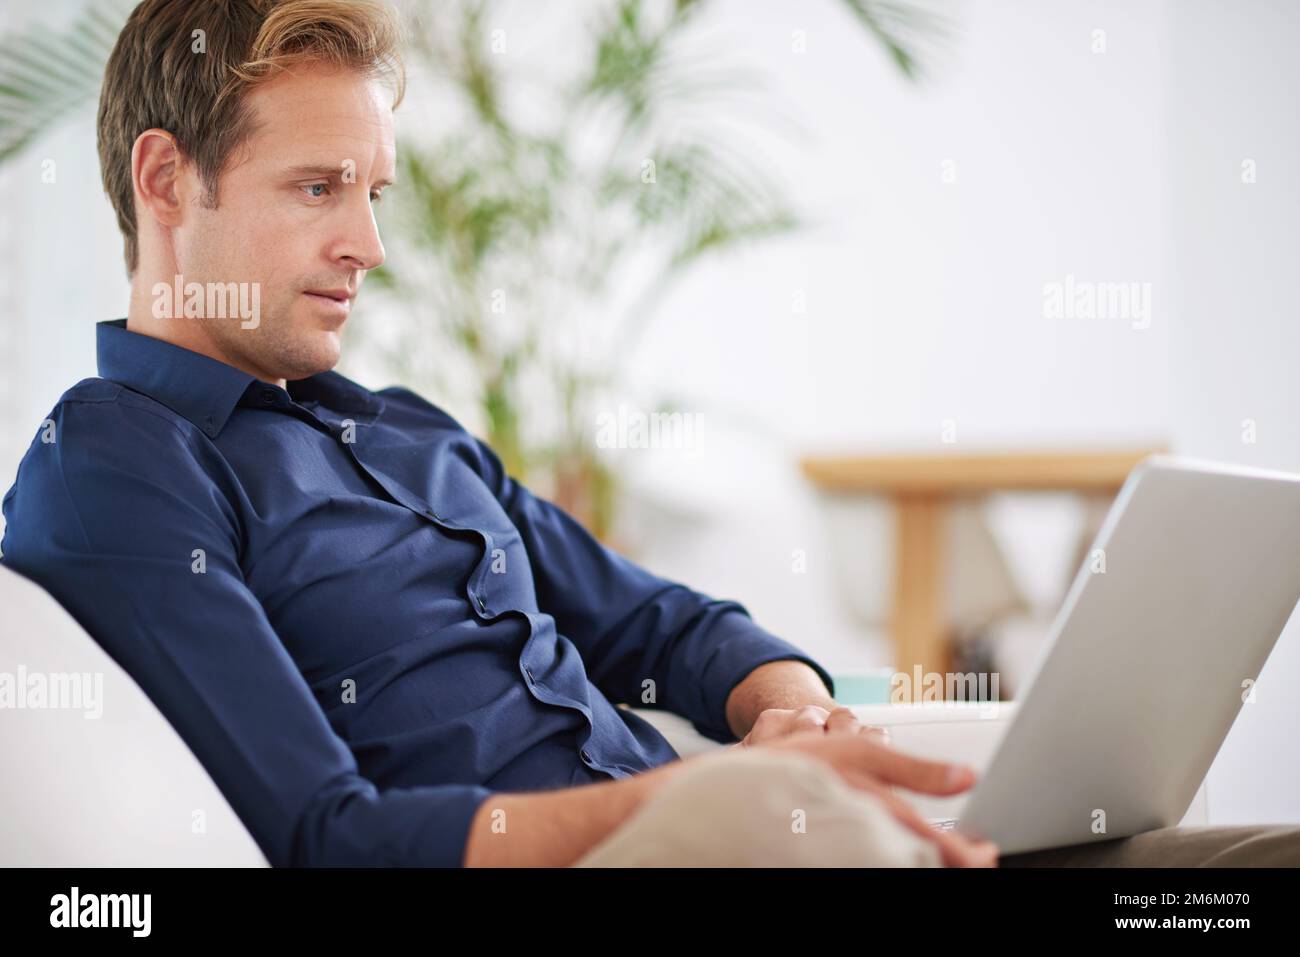 Taking a break from work. a handsome man relaxing at home with his laptop. Stock Photo